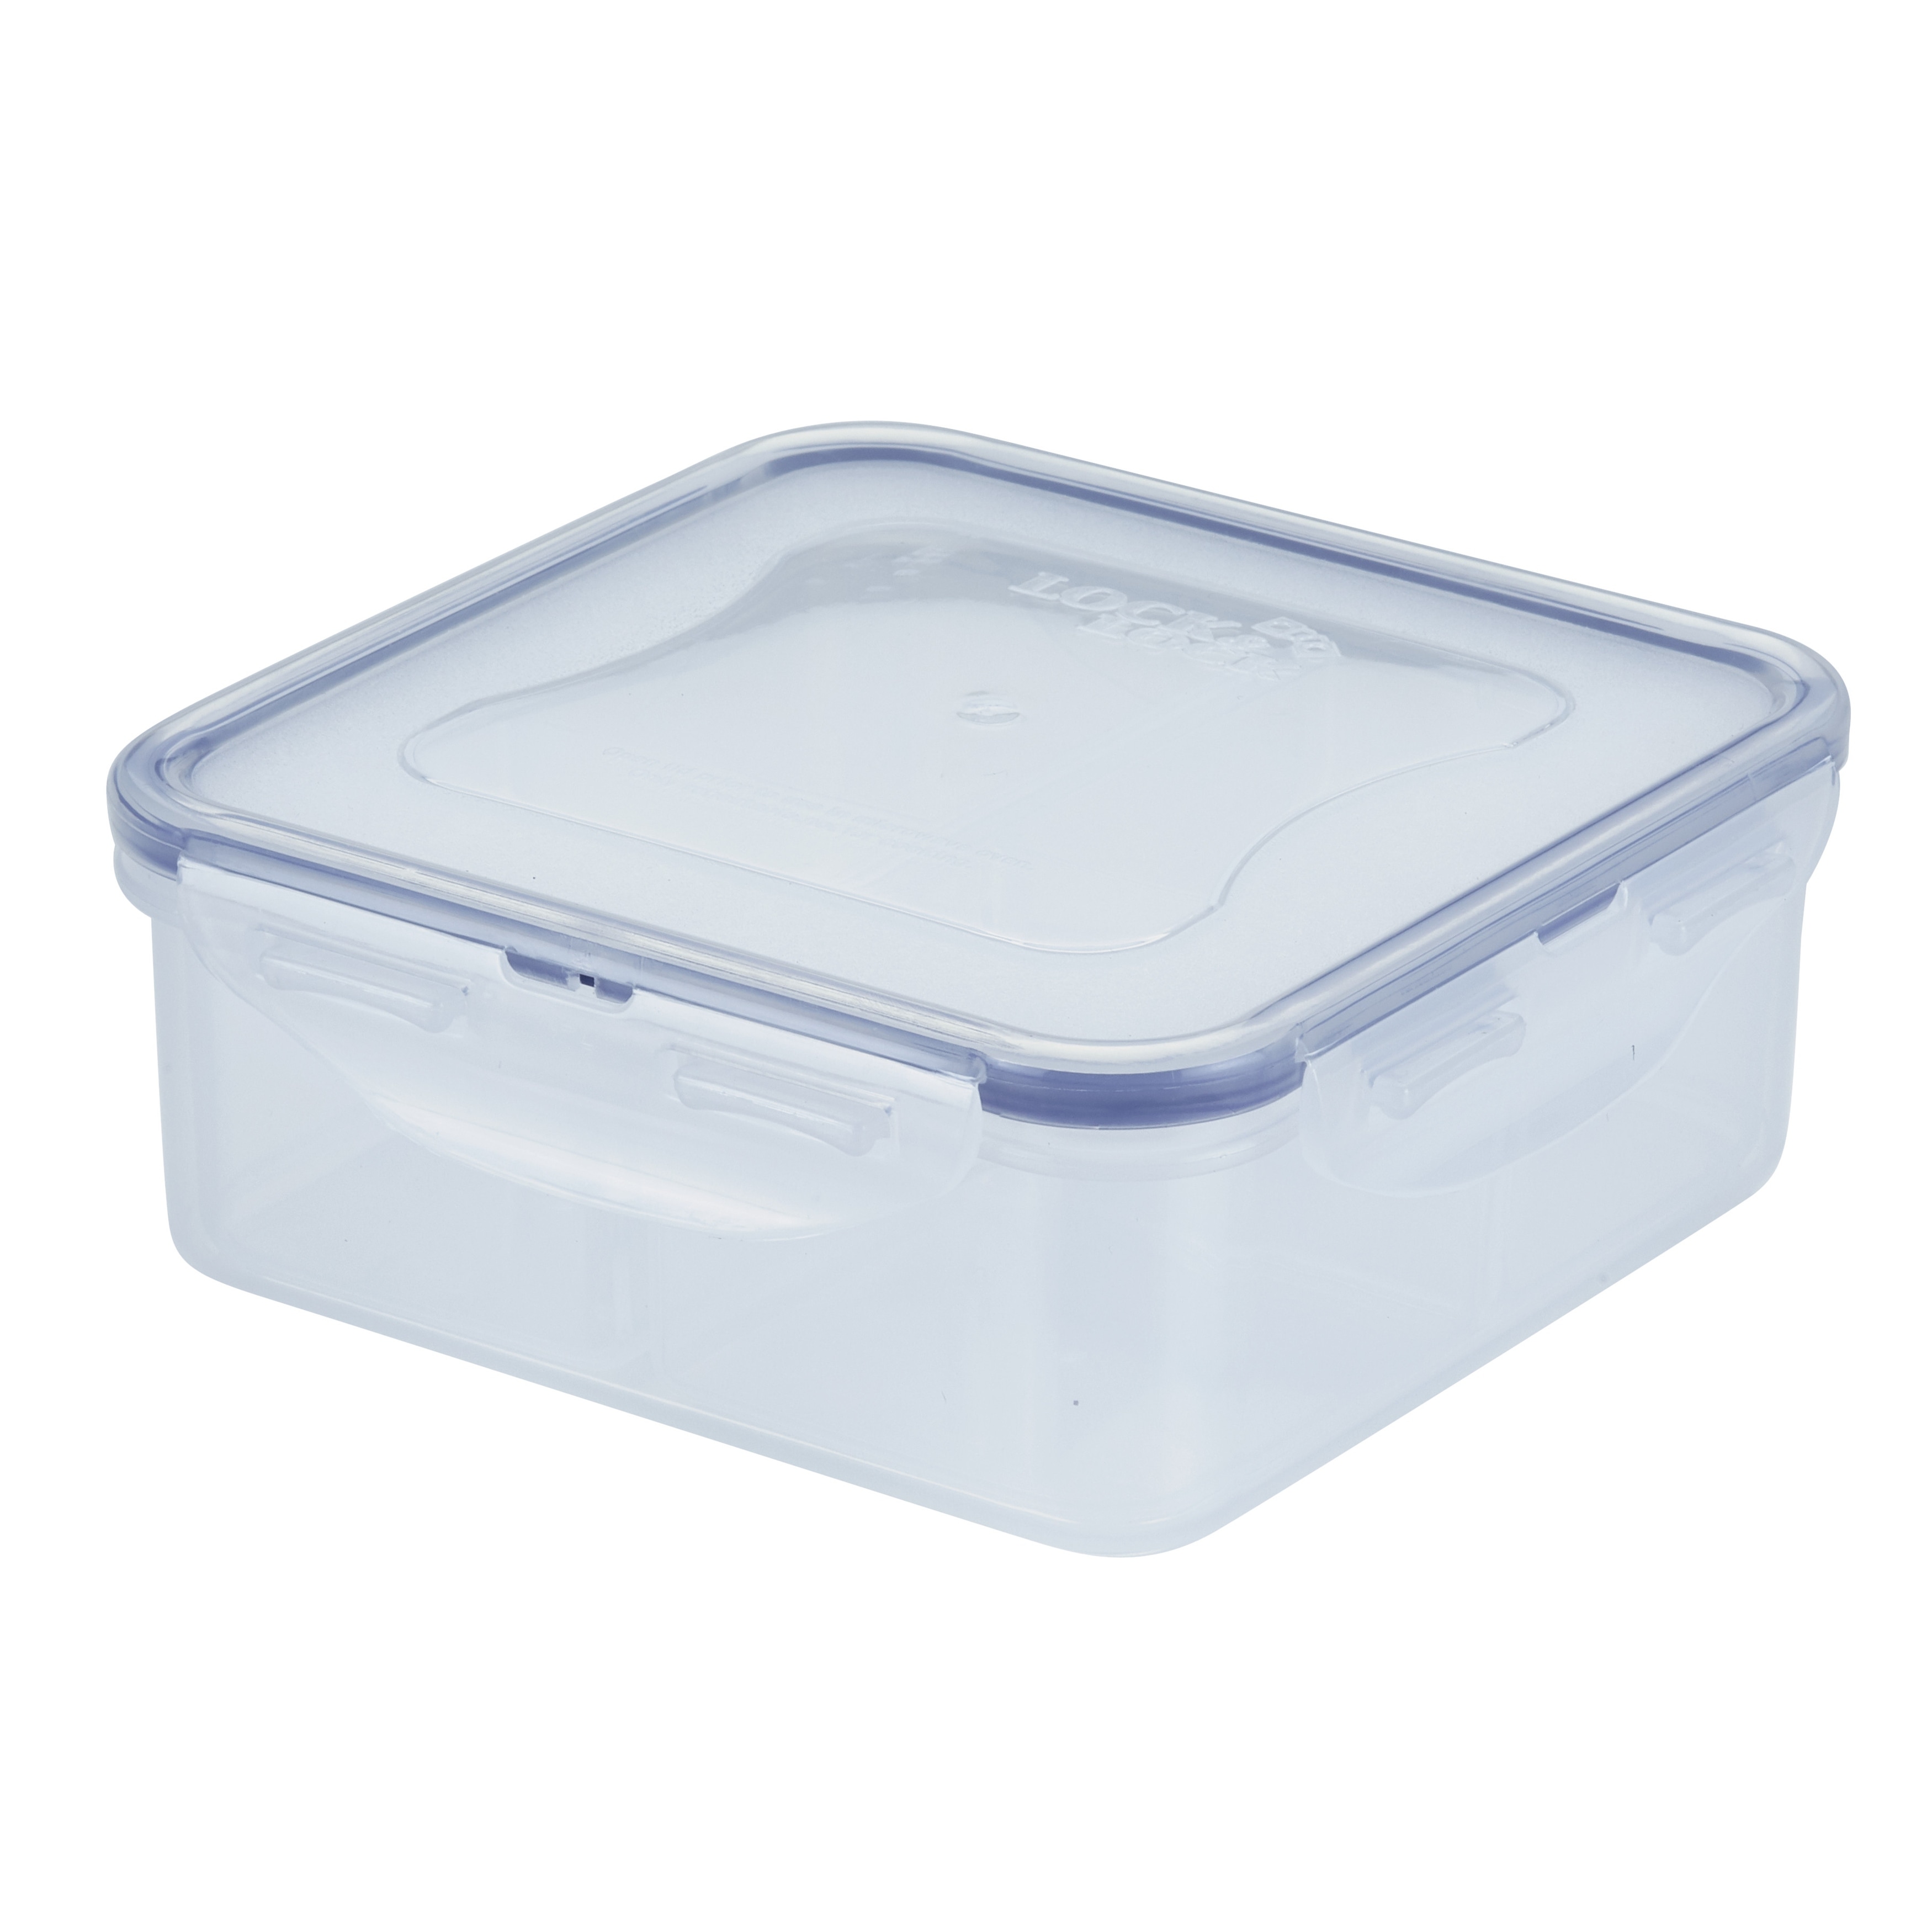 https://ak1.ostkcdn.com/images/products/is/images/direct/86386fa0e22603e2d524b7be0d6334b87943739f/Easy-Essentials-Divided-Square-Food-Storage-Container%2C-29oz.jpg